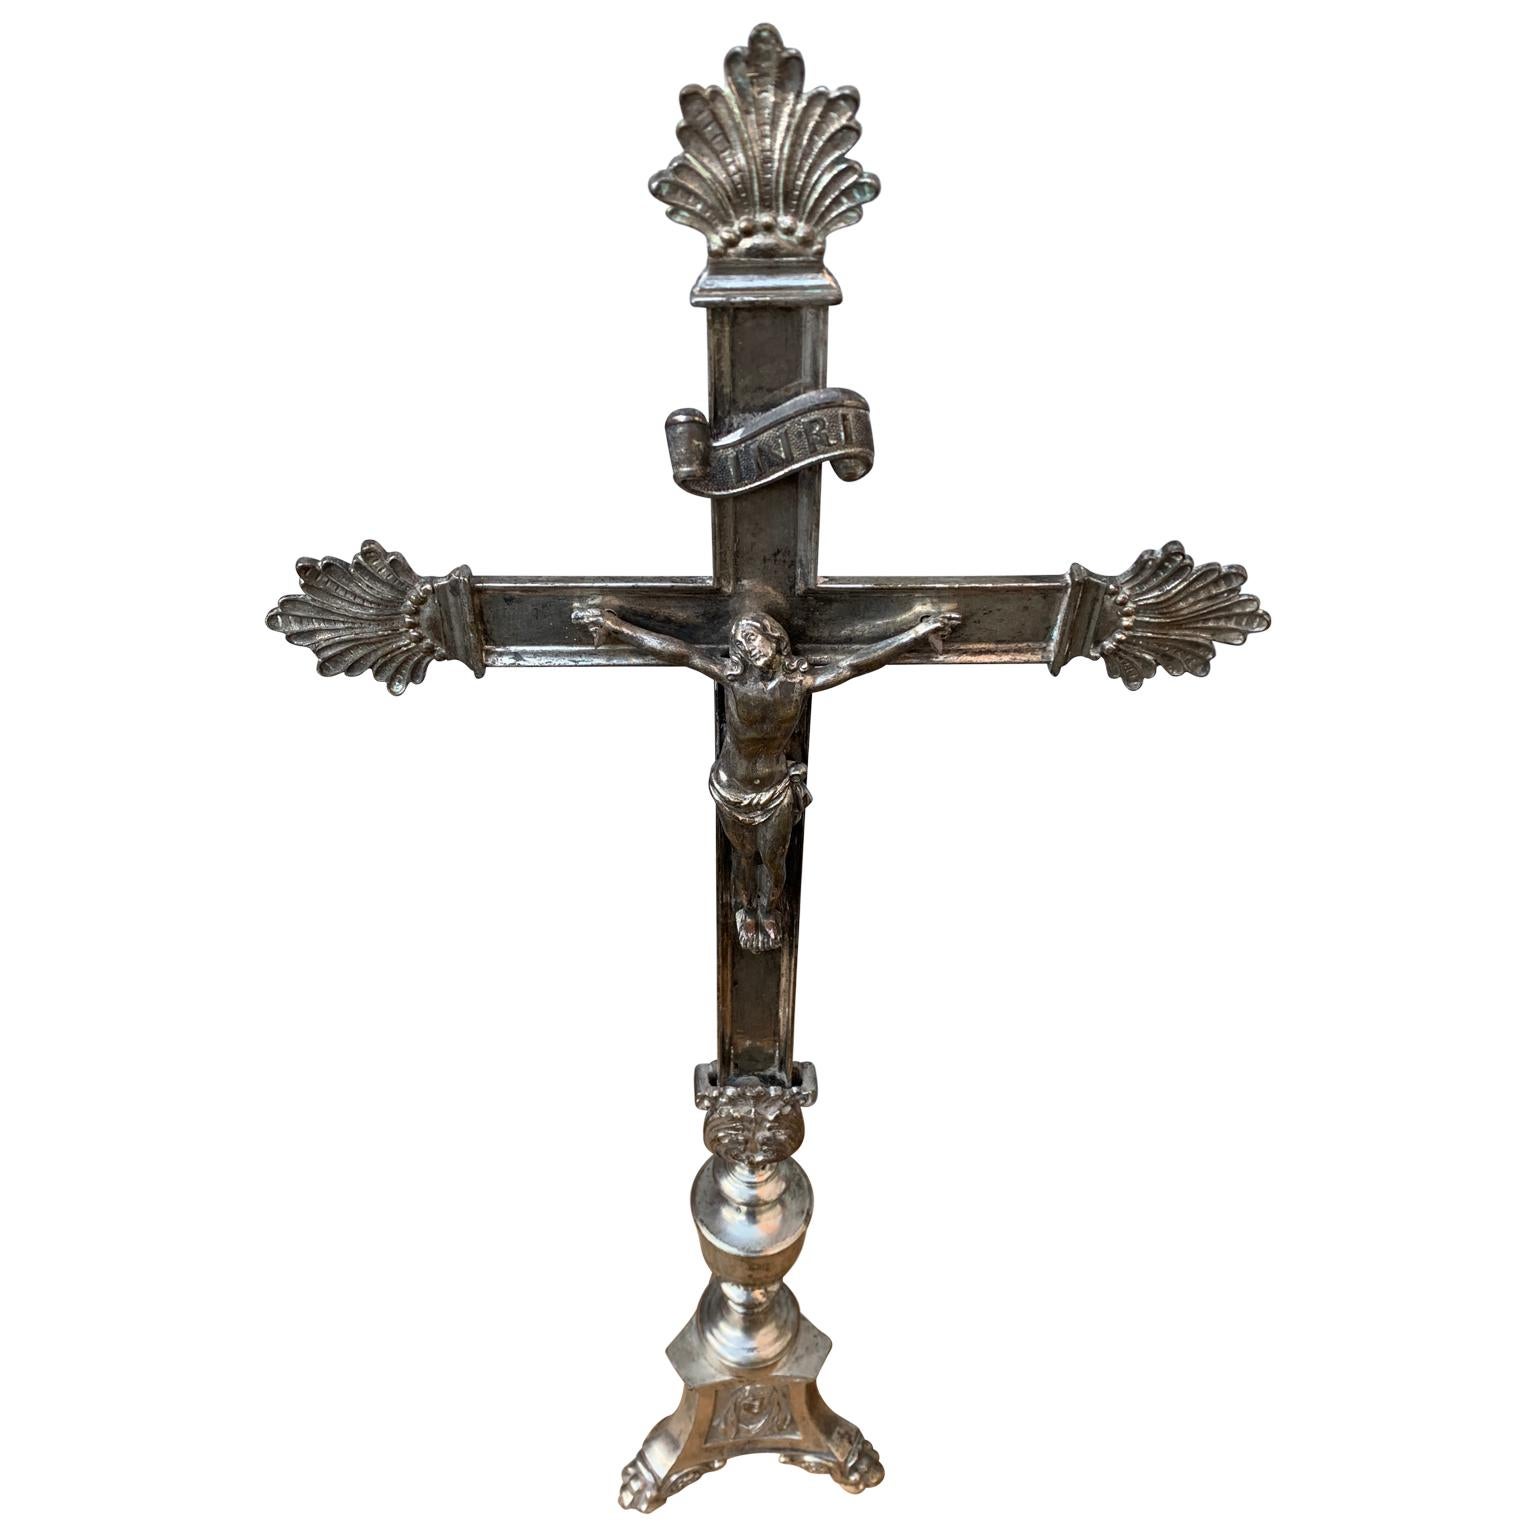 A 19th Century silver plated French alter crucifix. Above Jesus' head, there is a plaque reading 